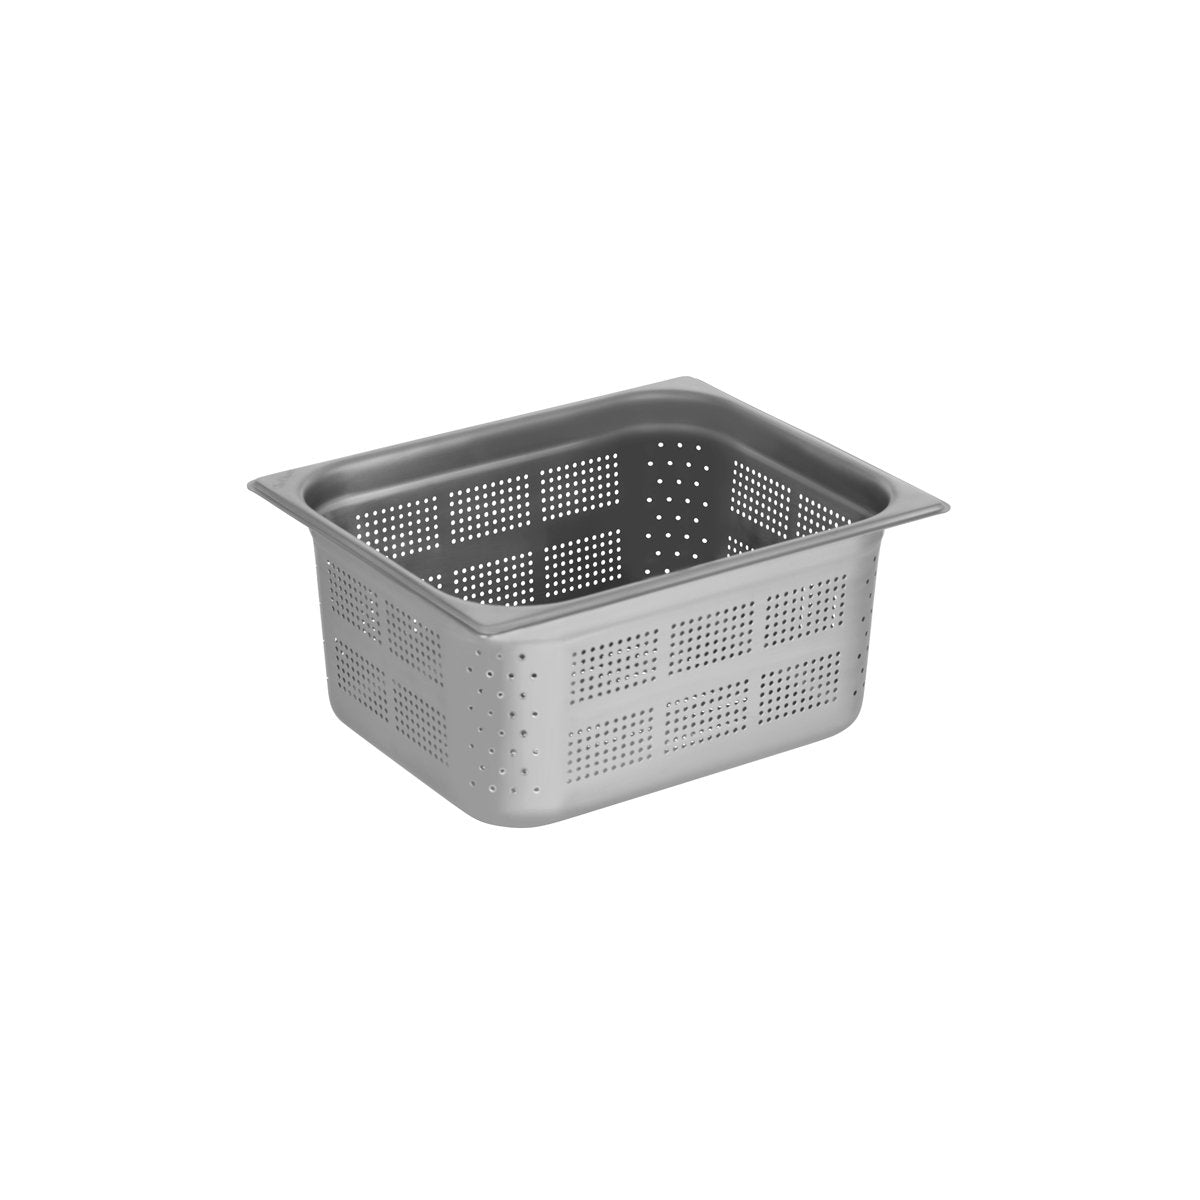 GNP-12150 Chef Inox Gastronorm Pan Perforated 1/2 Size 150mm Tomkin Australia Hospitality Supplies